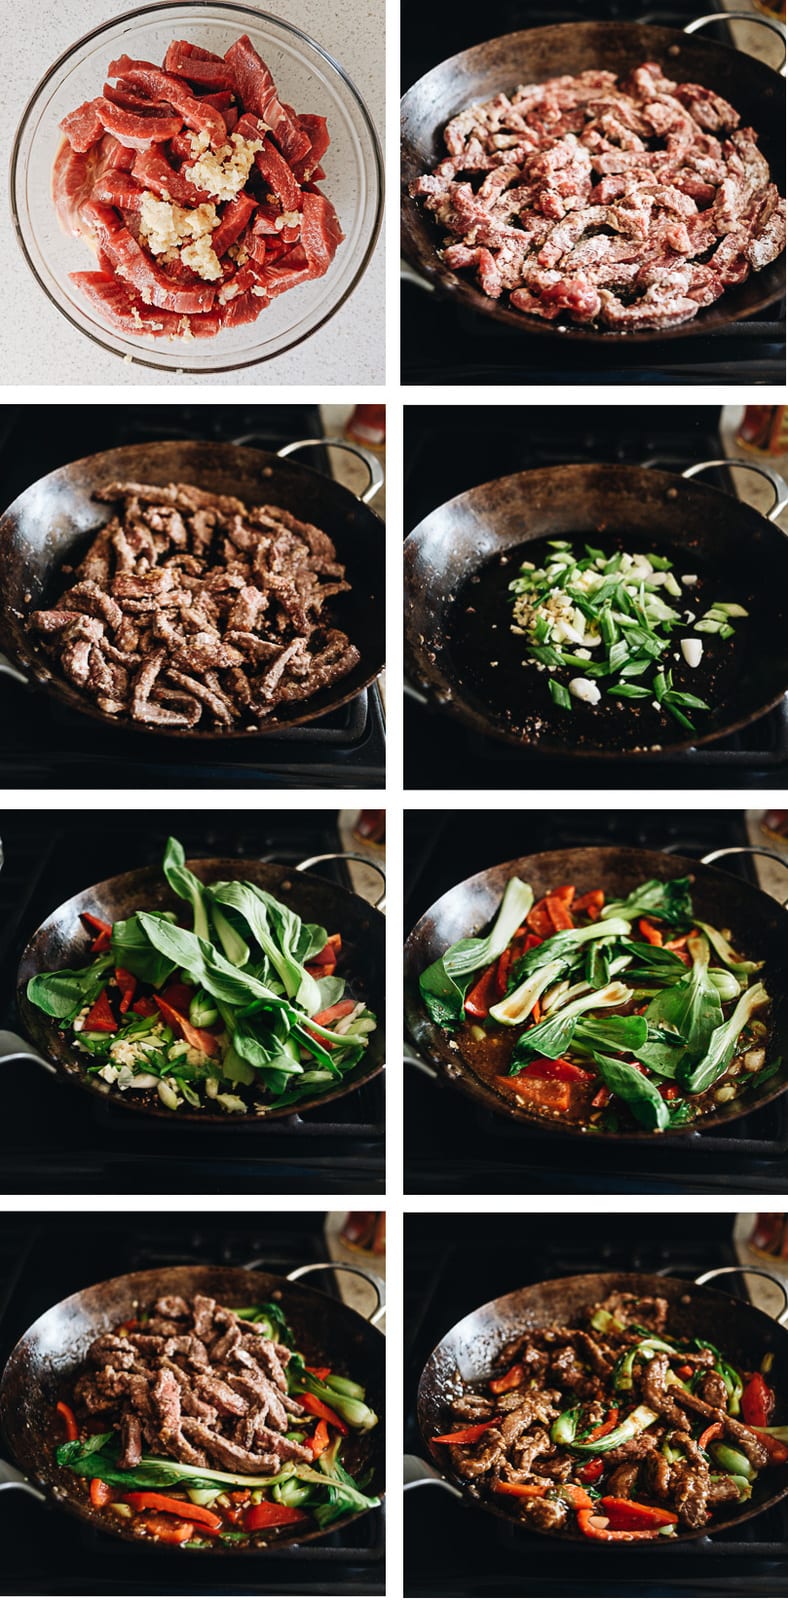 Ginger beef cooking step-by-step